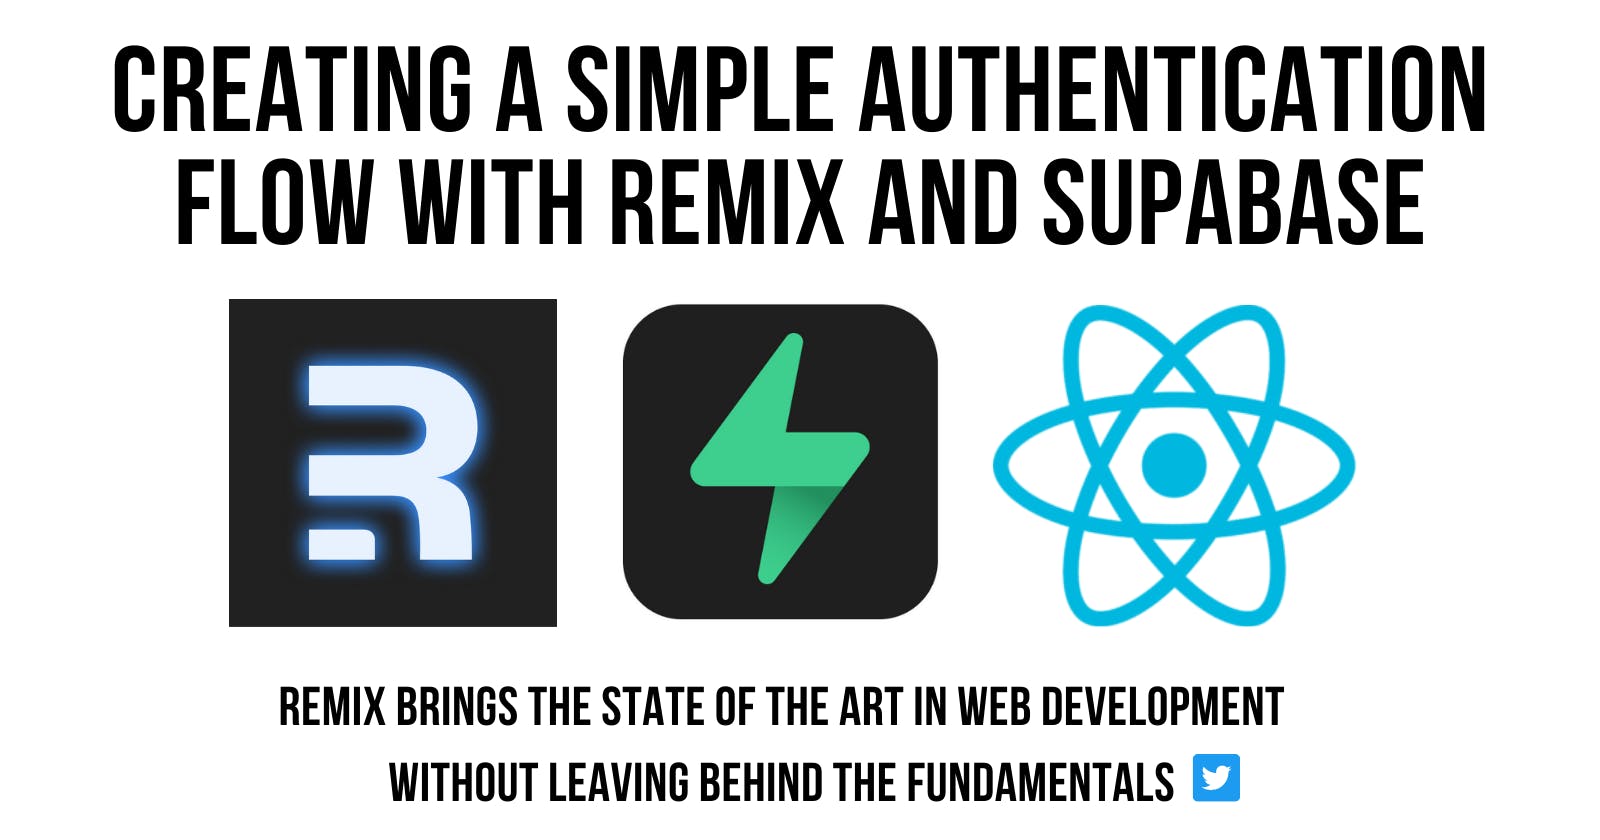 Creating An Authentication Flow With Remix and Supabase